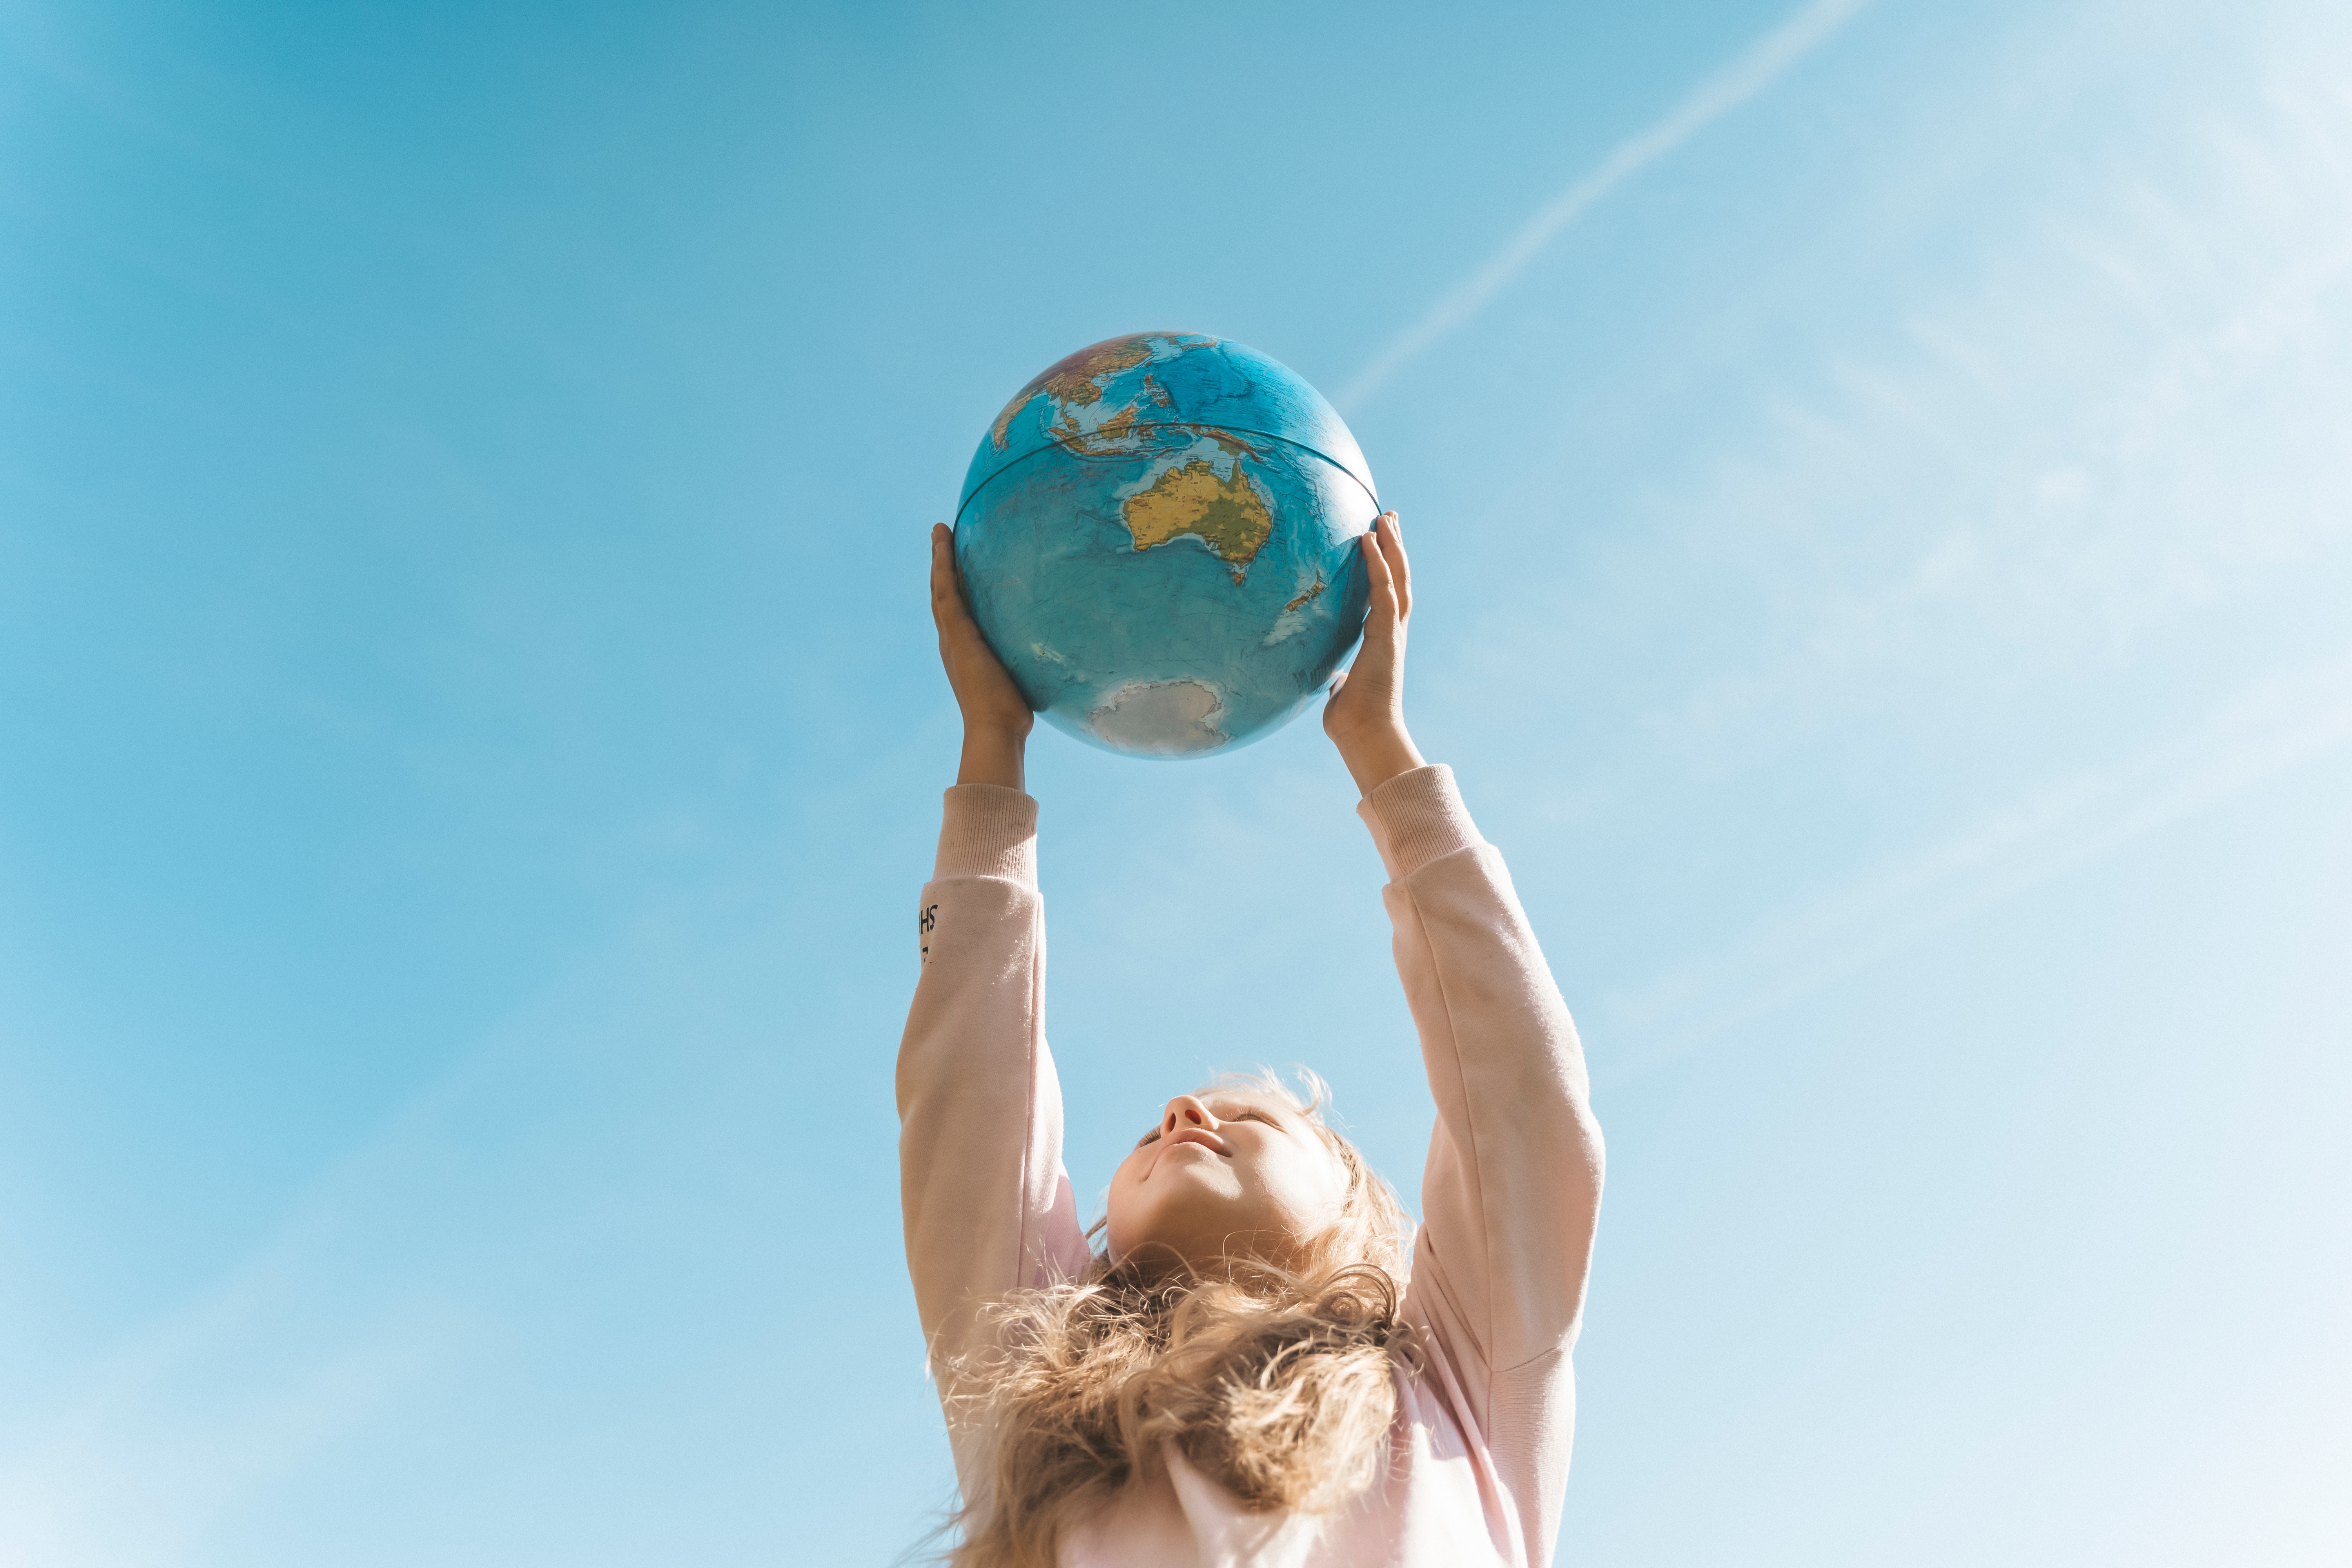 A young girl holds up a globe against a blue sky.